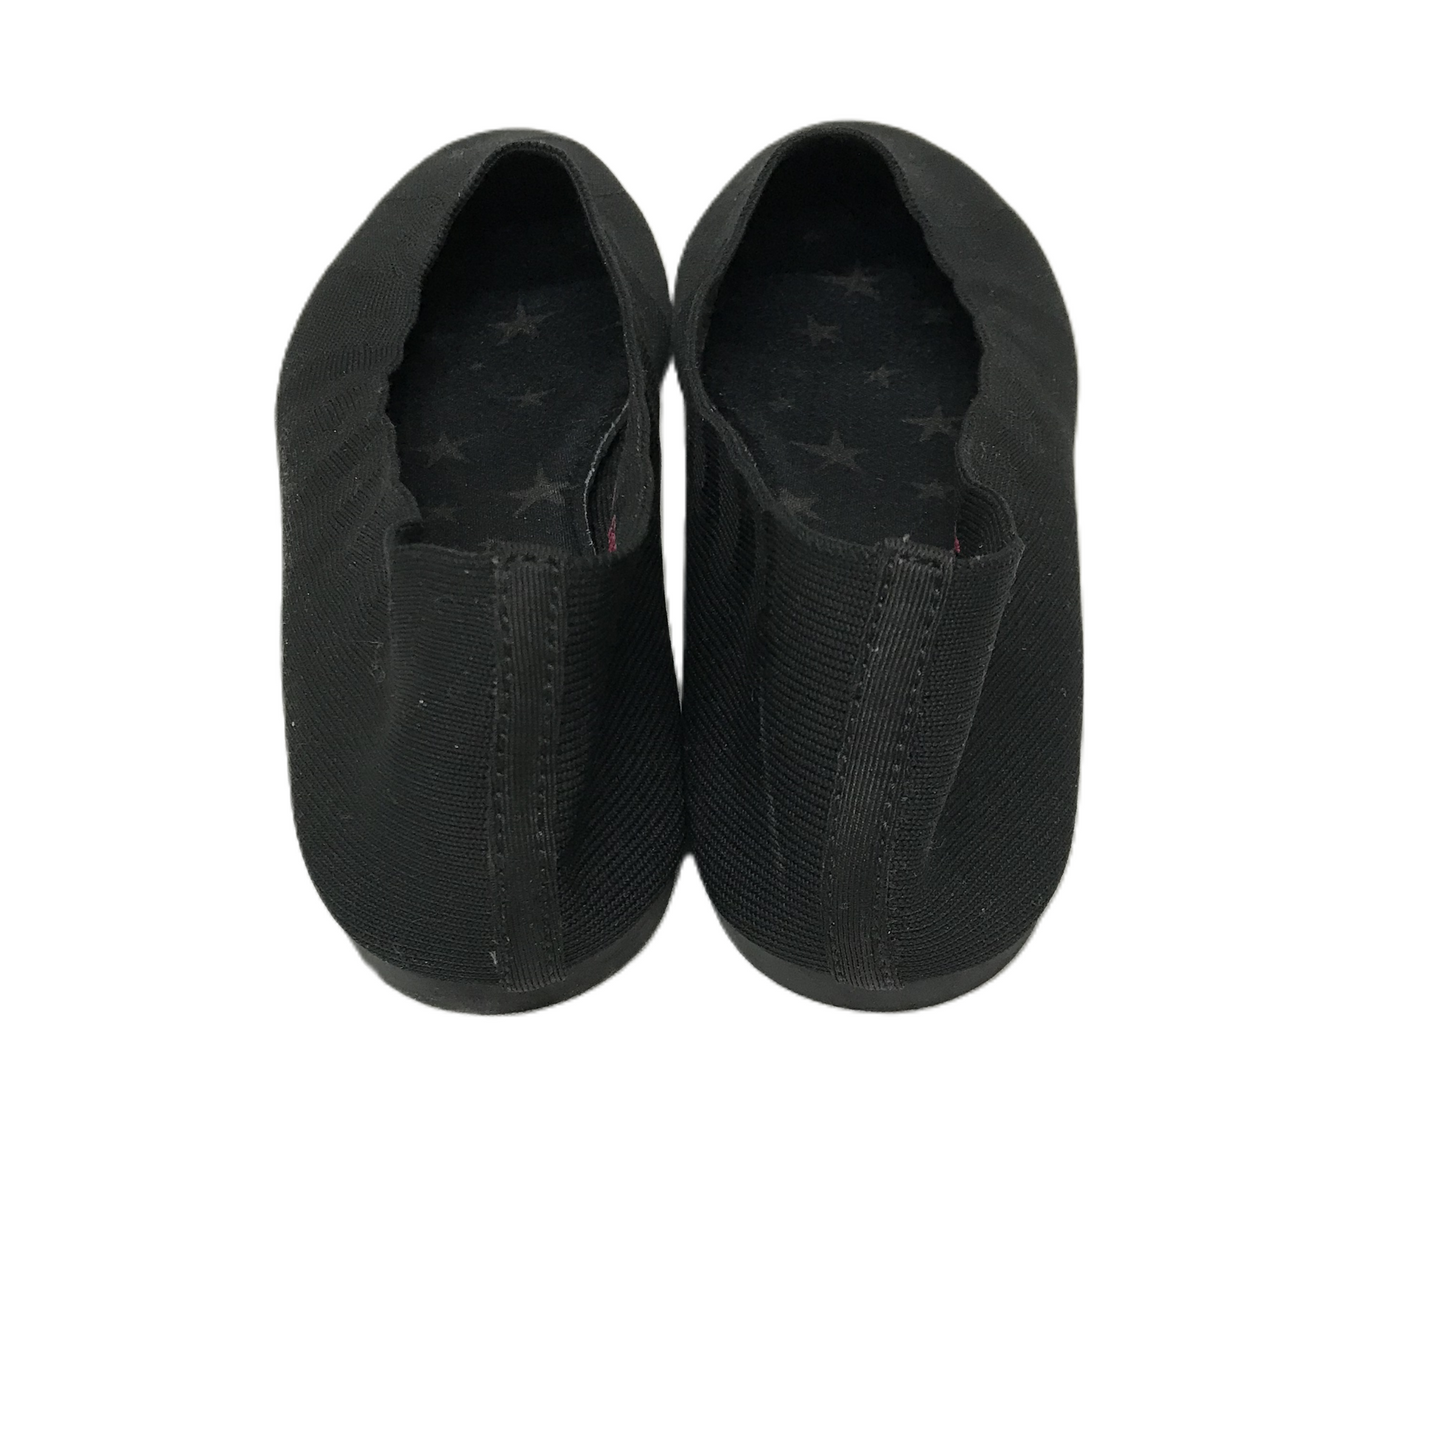 Black Shoes Flats By Skechers, Size: 8.5